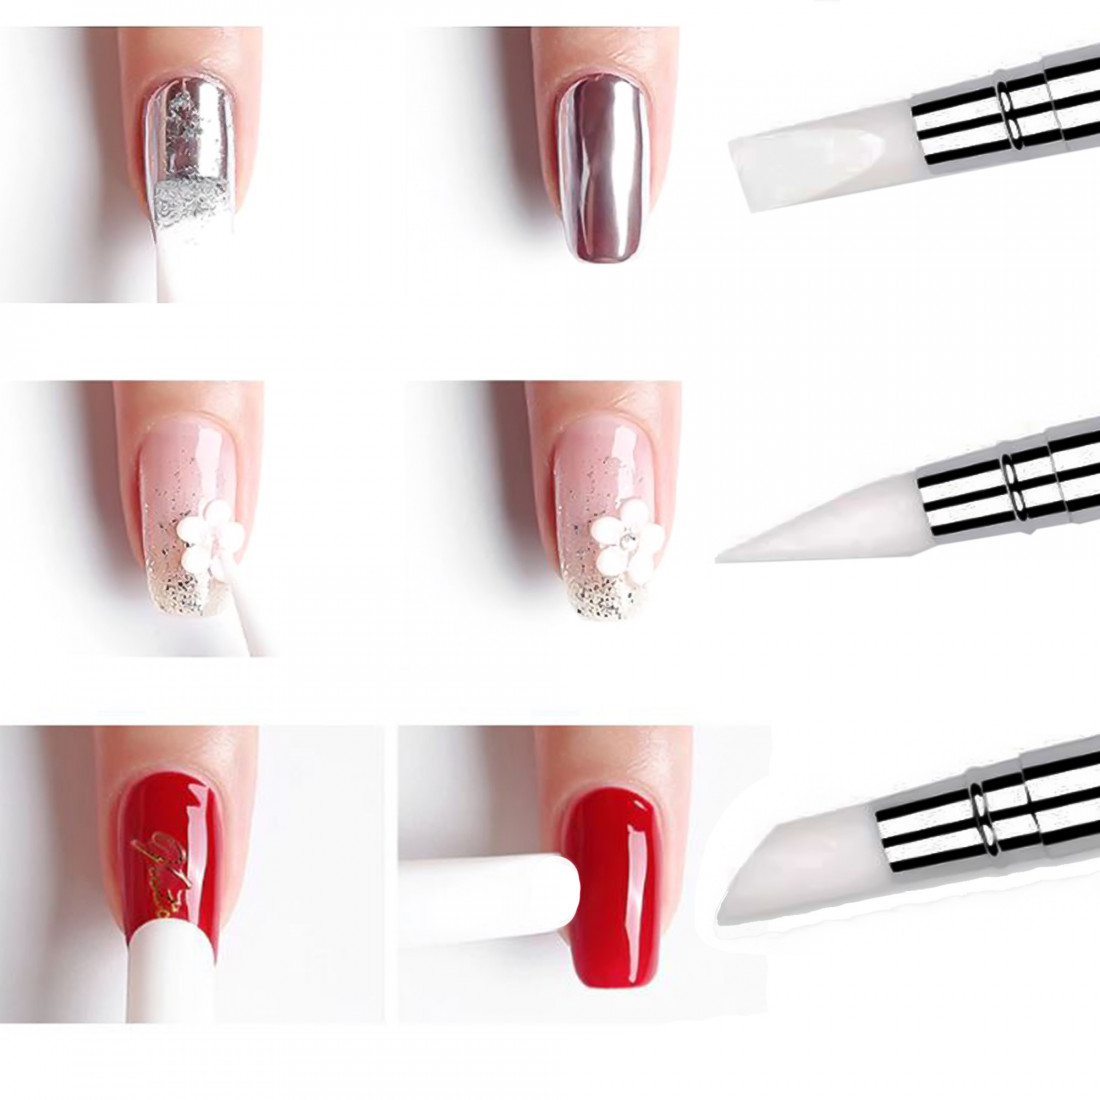 5 Pennelli Unghie silicone Nail